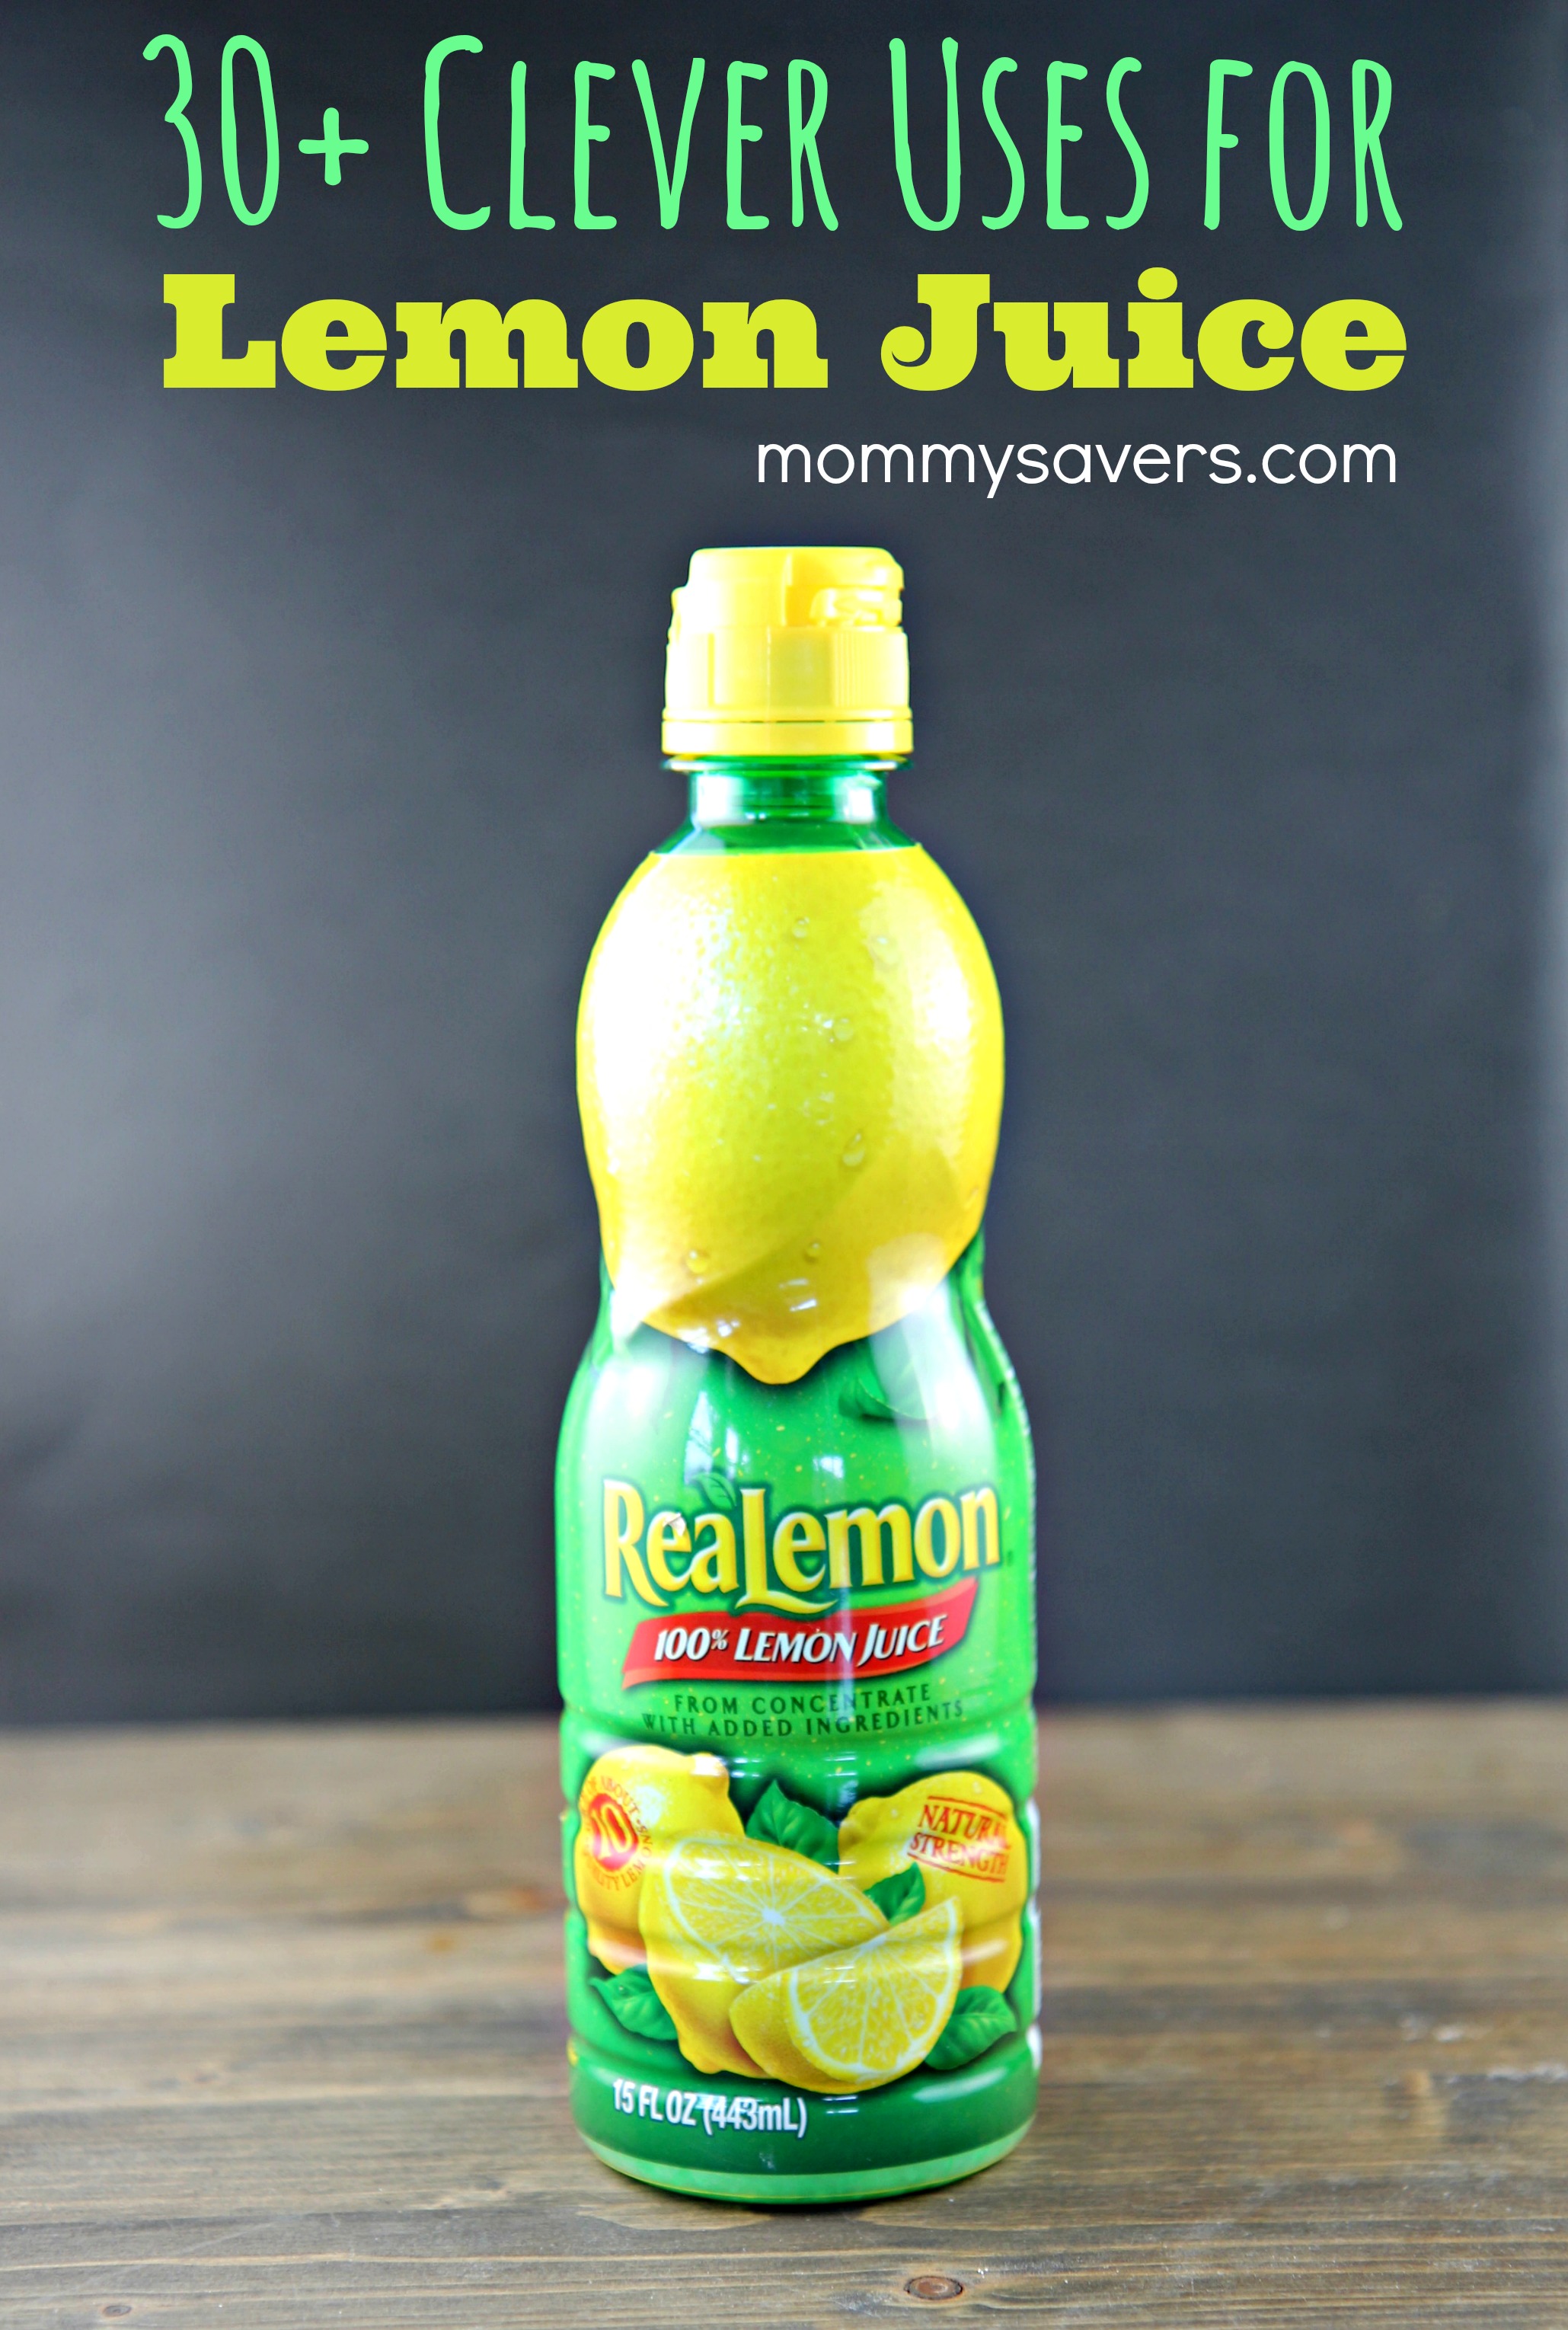 30 Clever Uses for Lemon Juice | Mommysavers